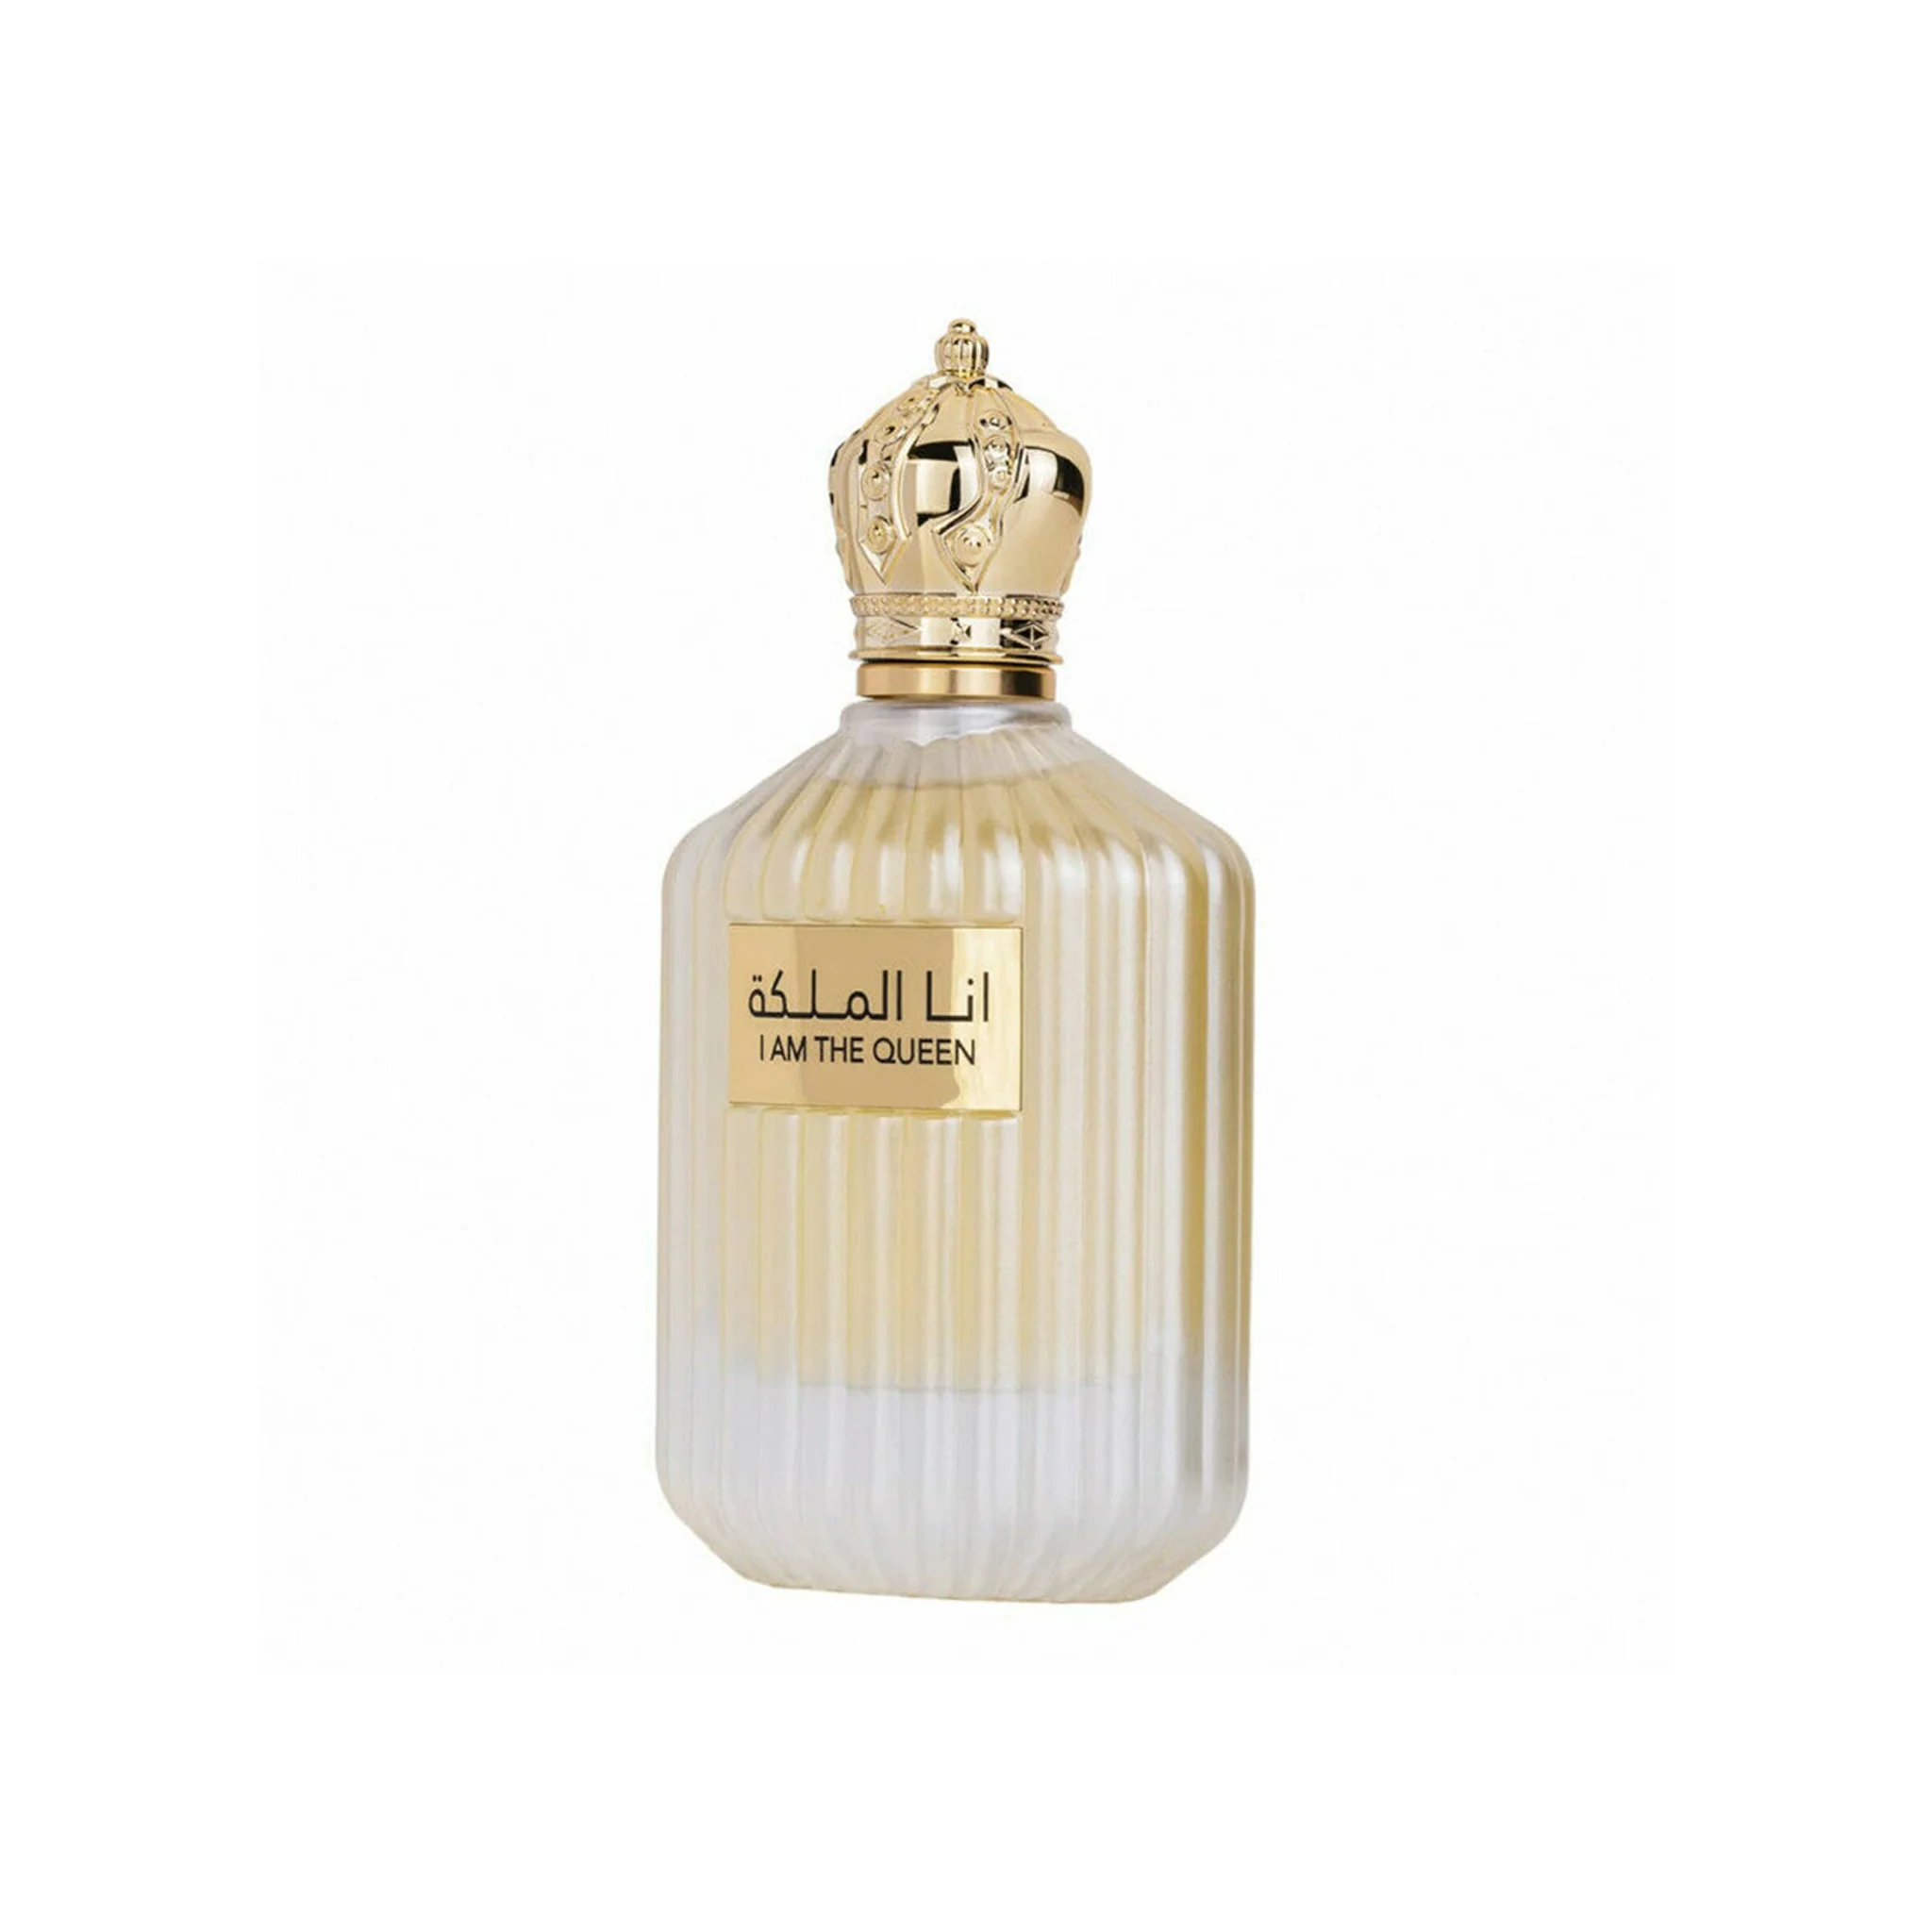 Scent of Royalty: Arabian Oud Perfumes Fit for a Queen